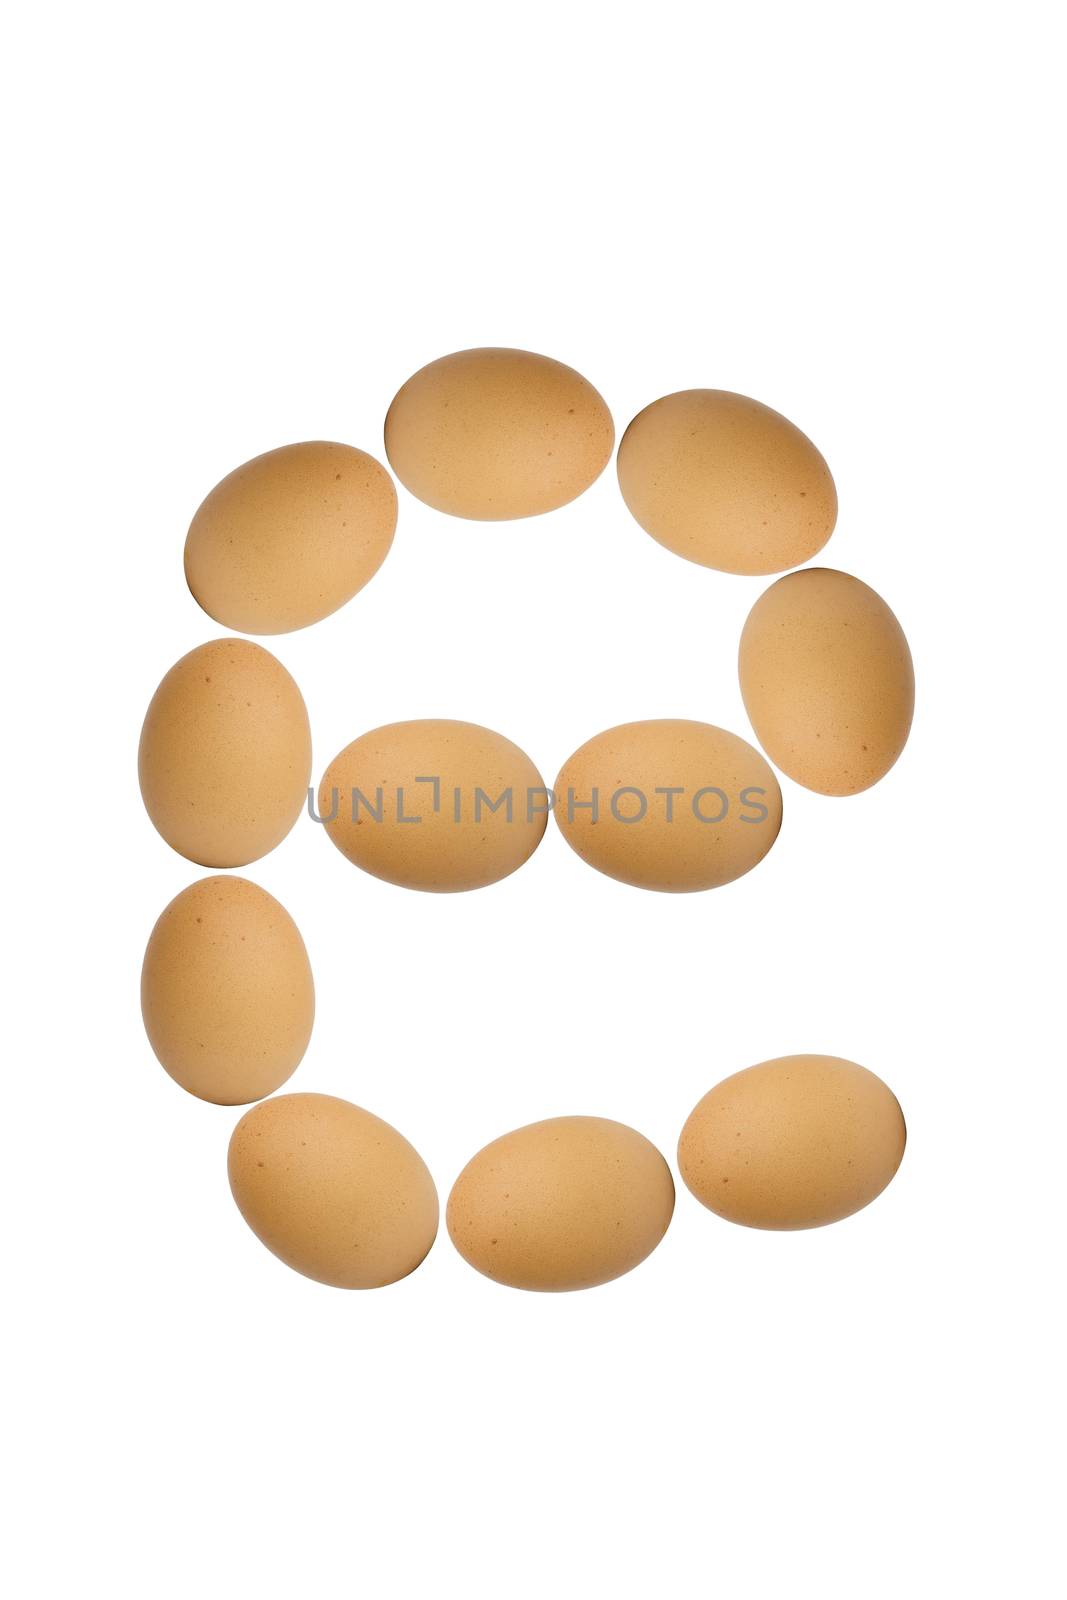 Alphabets  A to Z from brown eggs alphabet isolated on white background, e